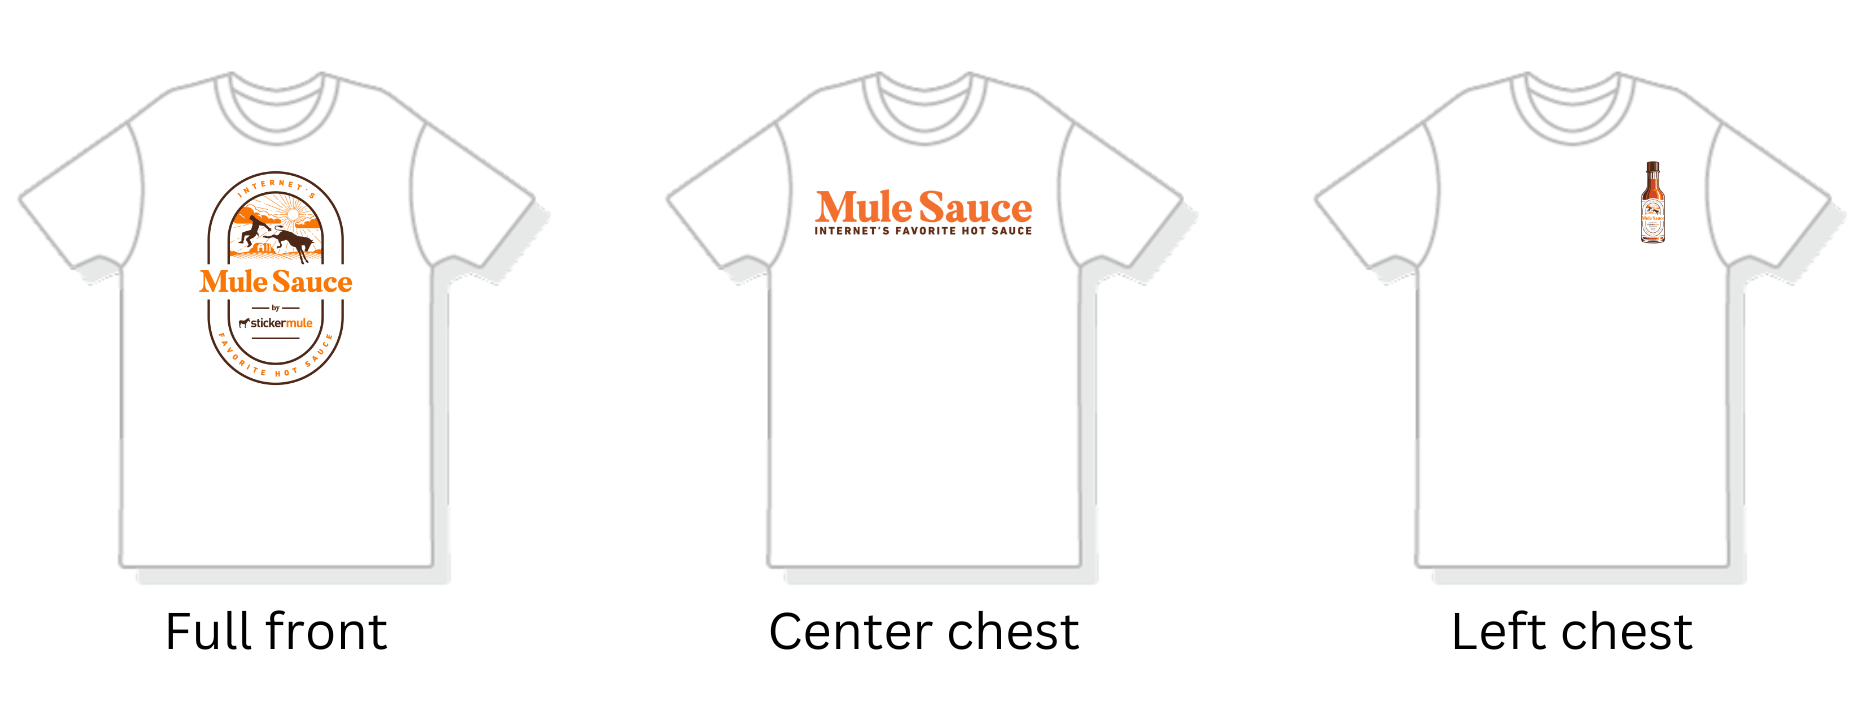 custom t-shirts with designs printed in different locations like full front, centre chest, and left chest